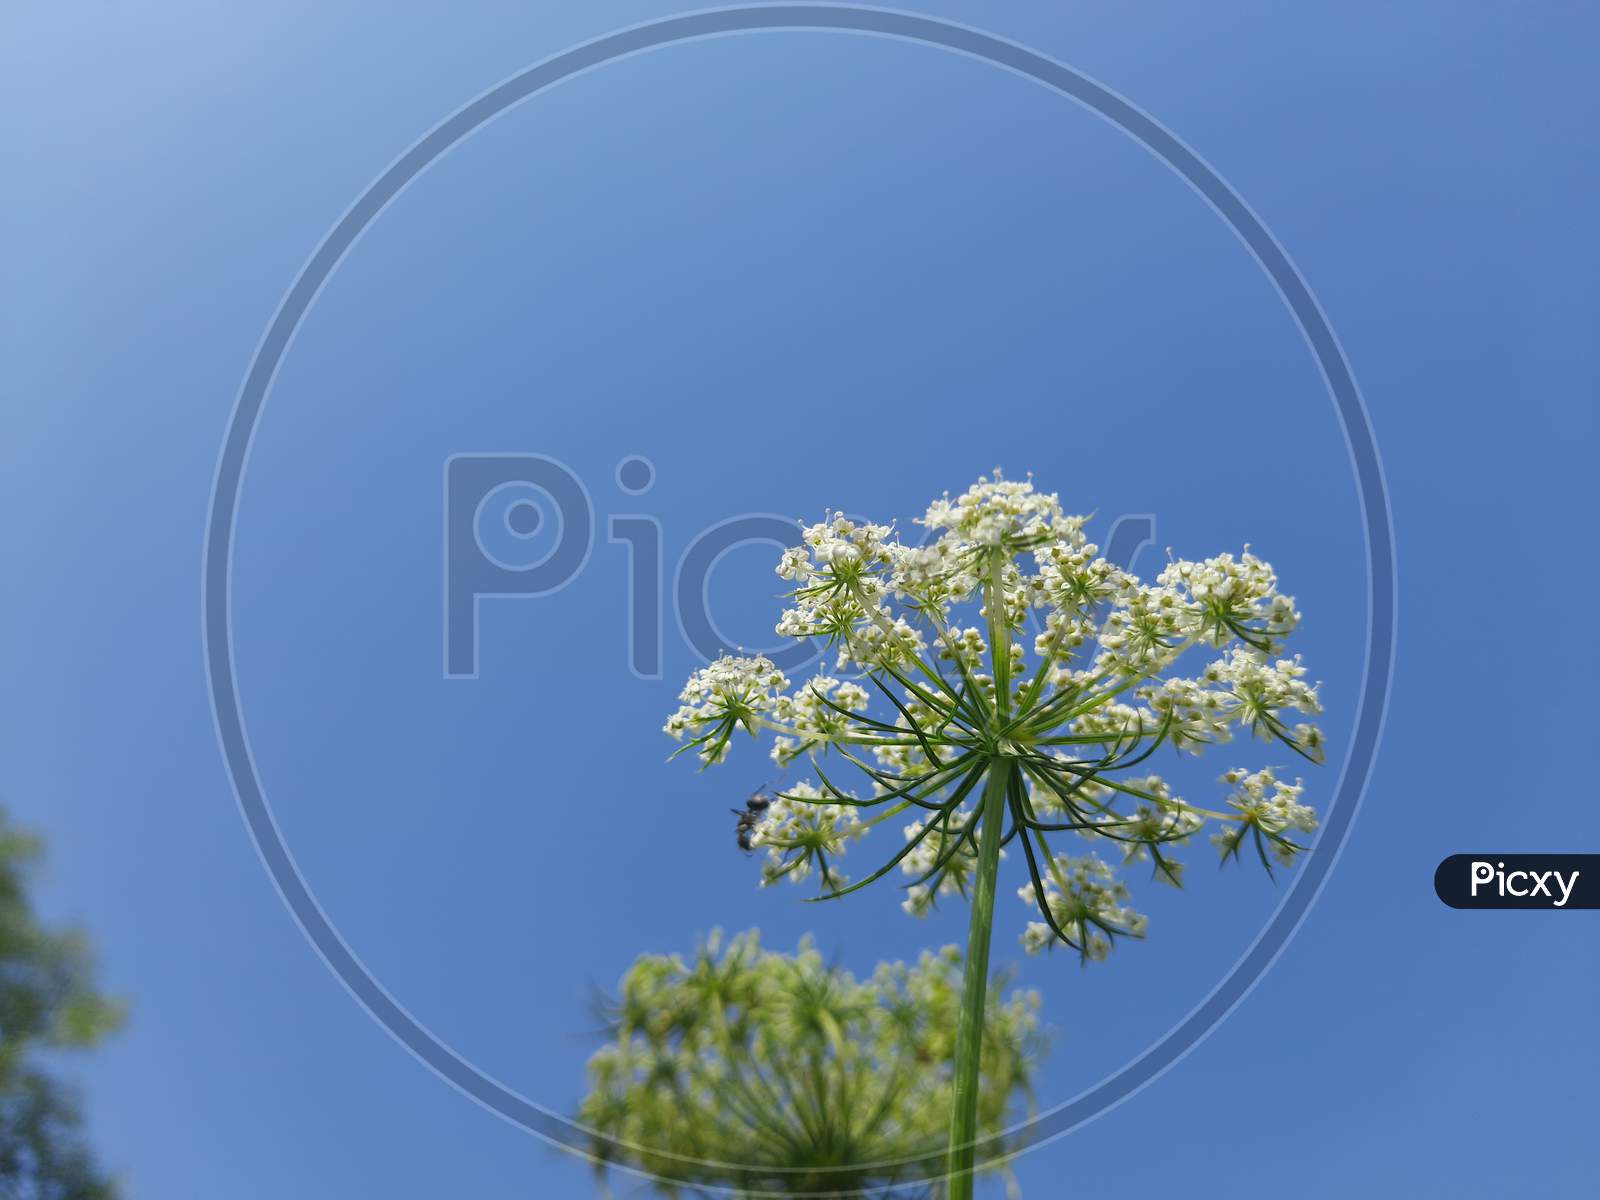 white carrot flowers in blue sky background.